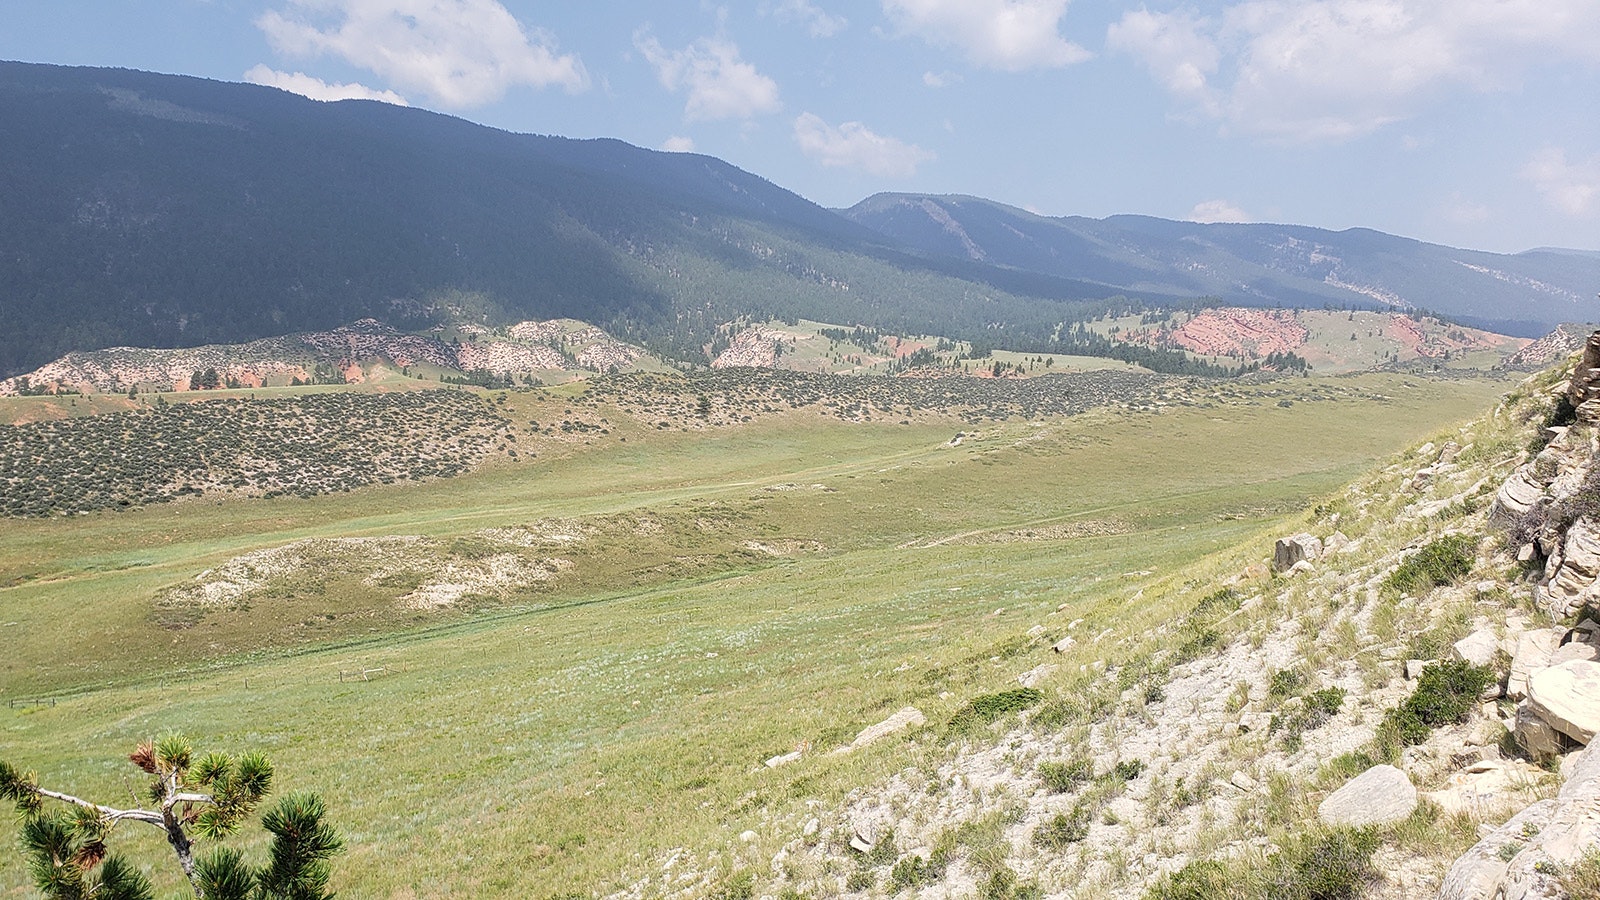 The Bighorn Mountains, left, pushed up a sizable section of the Morrison formation at right, exposing dinosaur bones from the Jurassic age 150 million years ago.